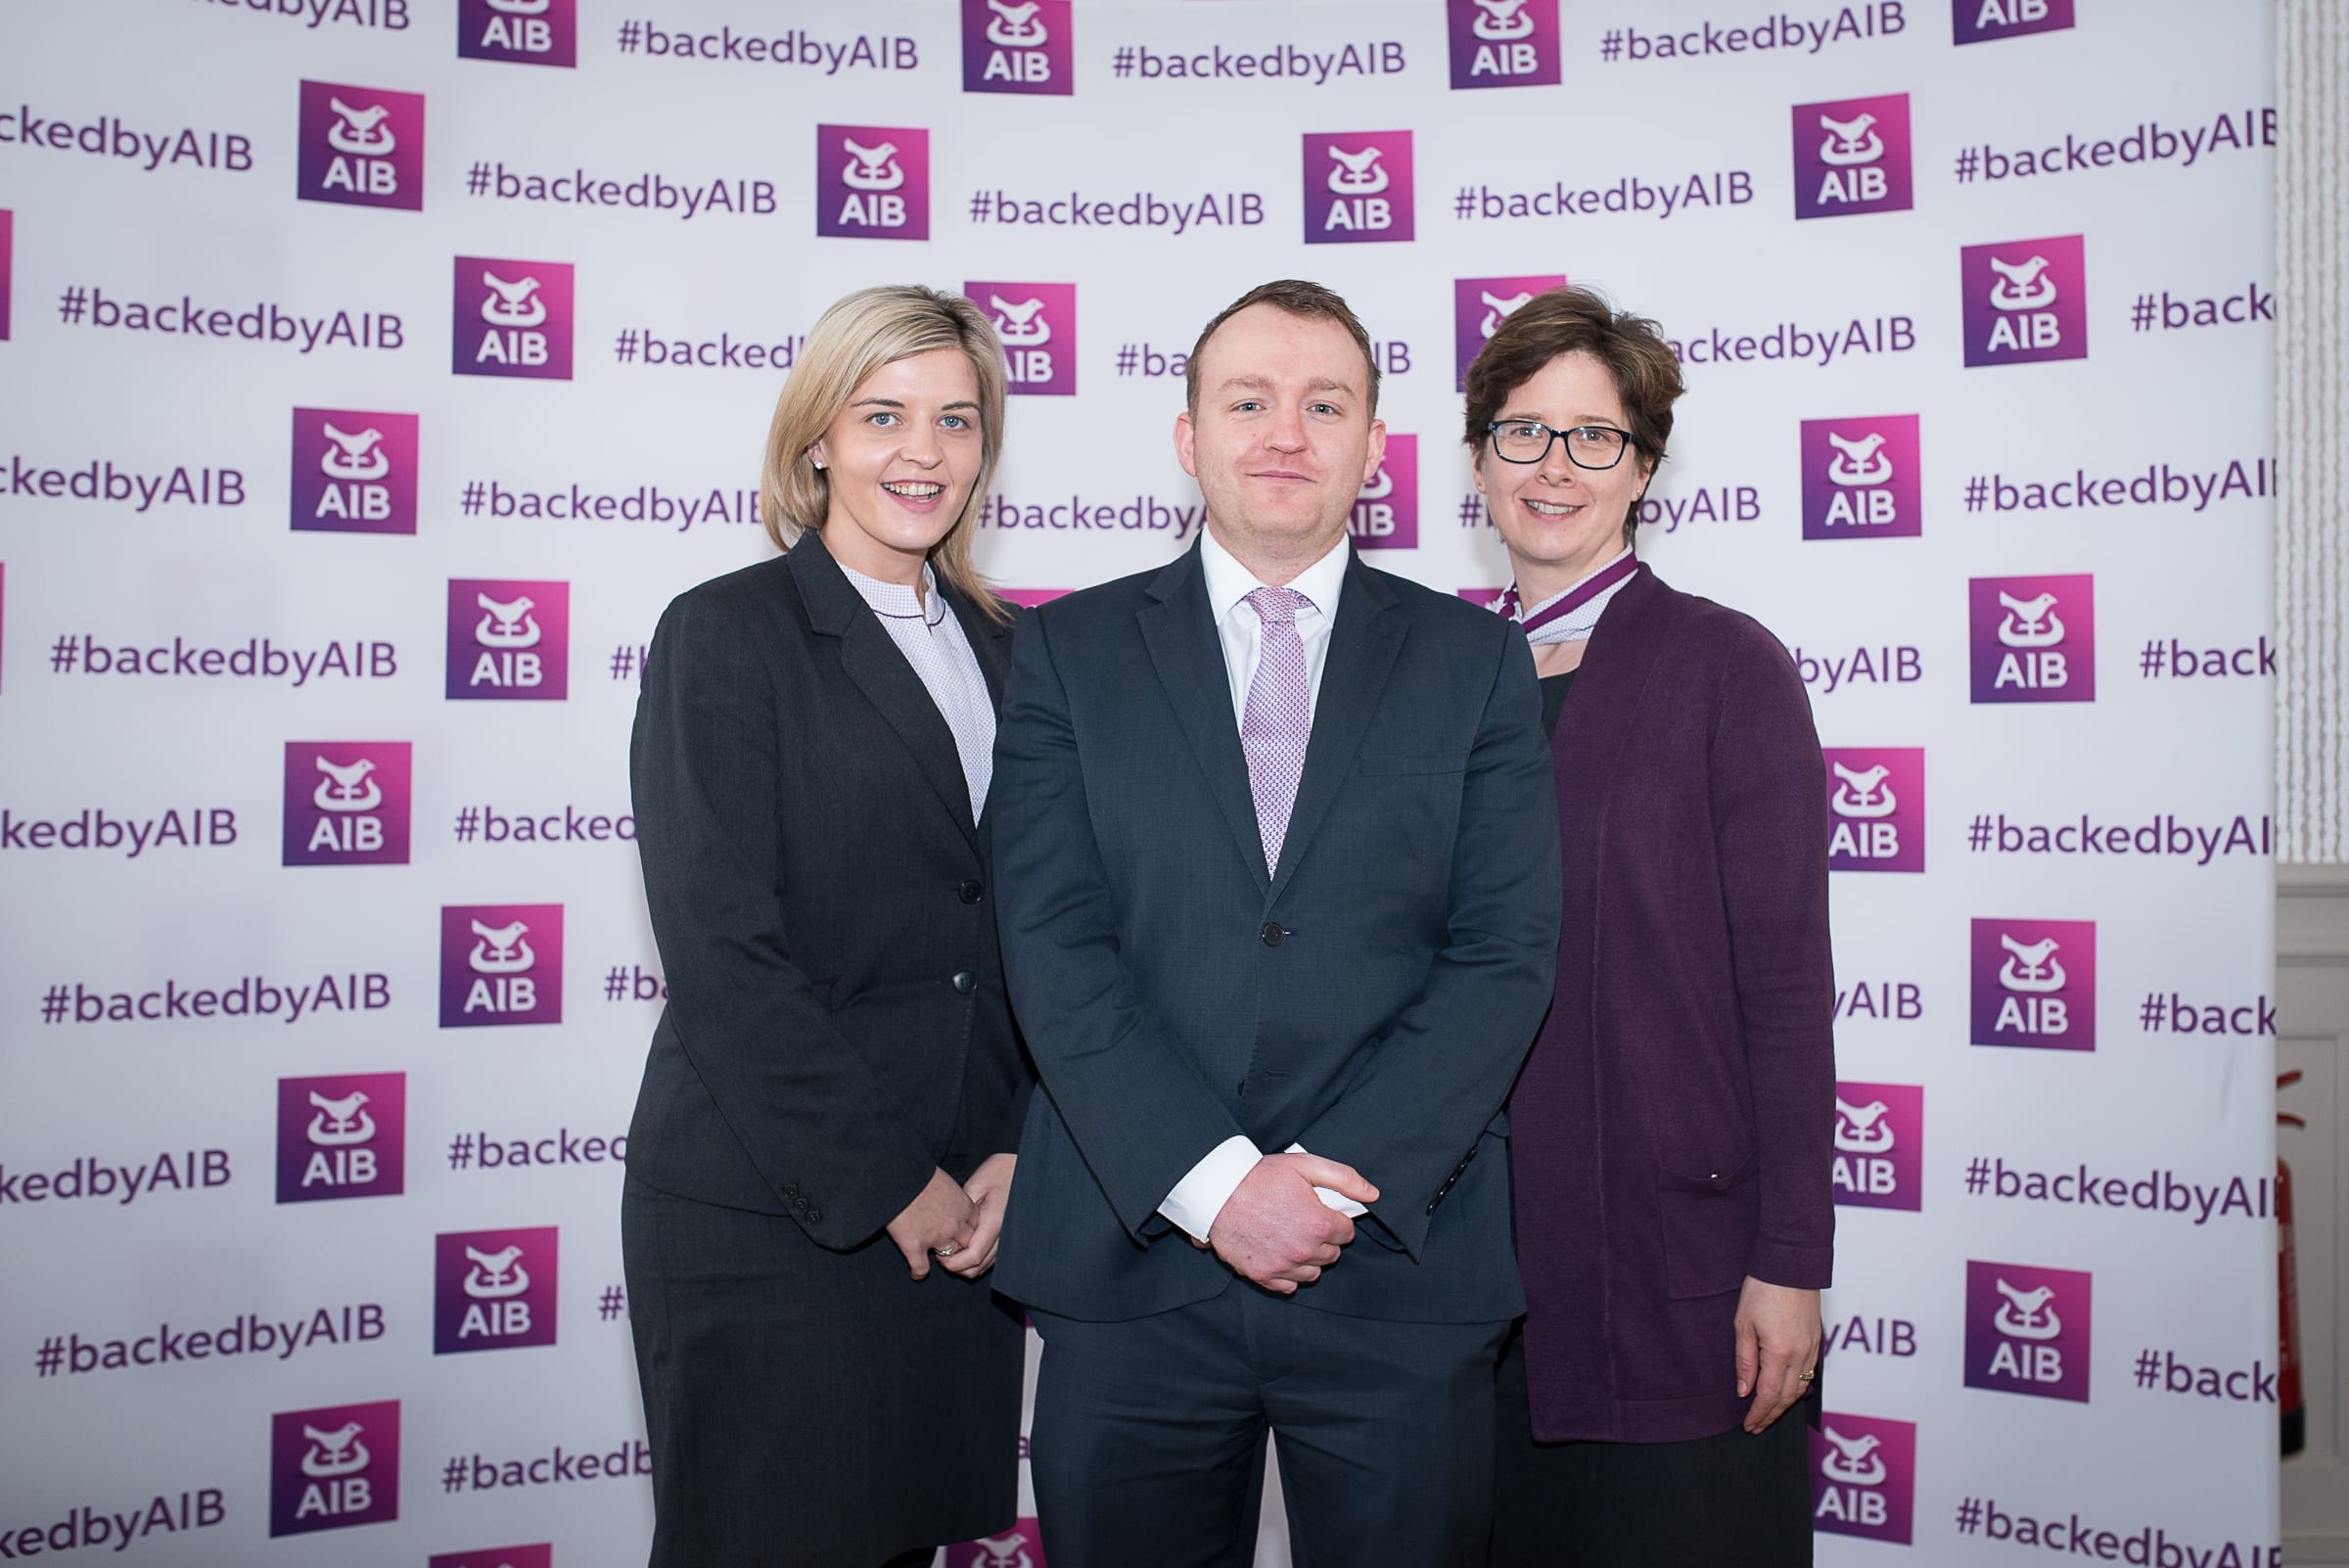 From left to right Agri Tourism Event Newcastlewest which took place on the 29th April in The Longcourt House Hotel: Ciara O’Grady- AIB, Alan Waters- AIB, Geraldine Naughton - Aib